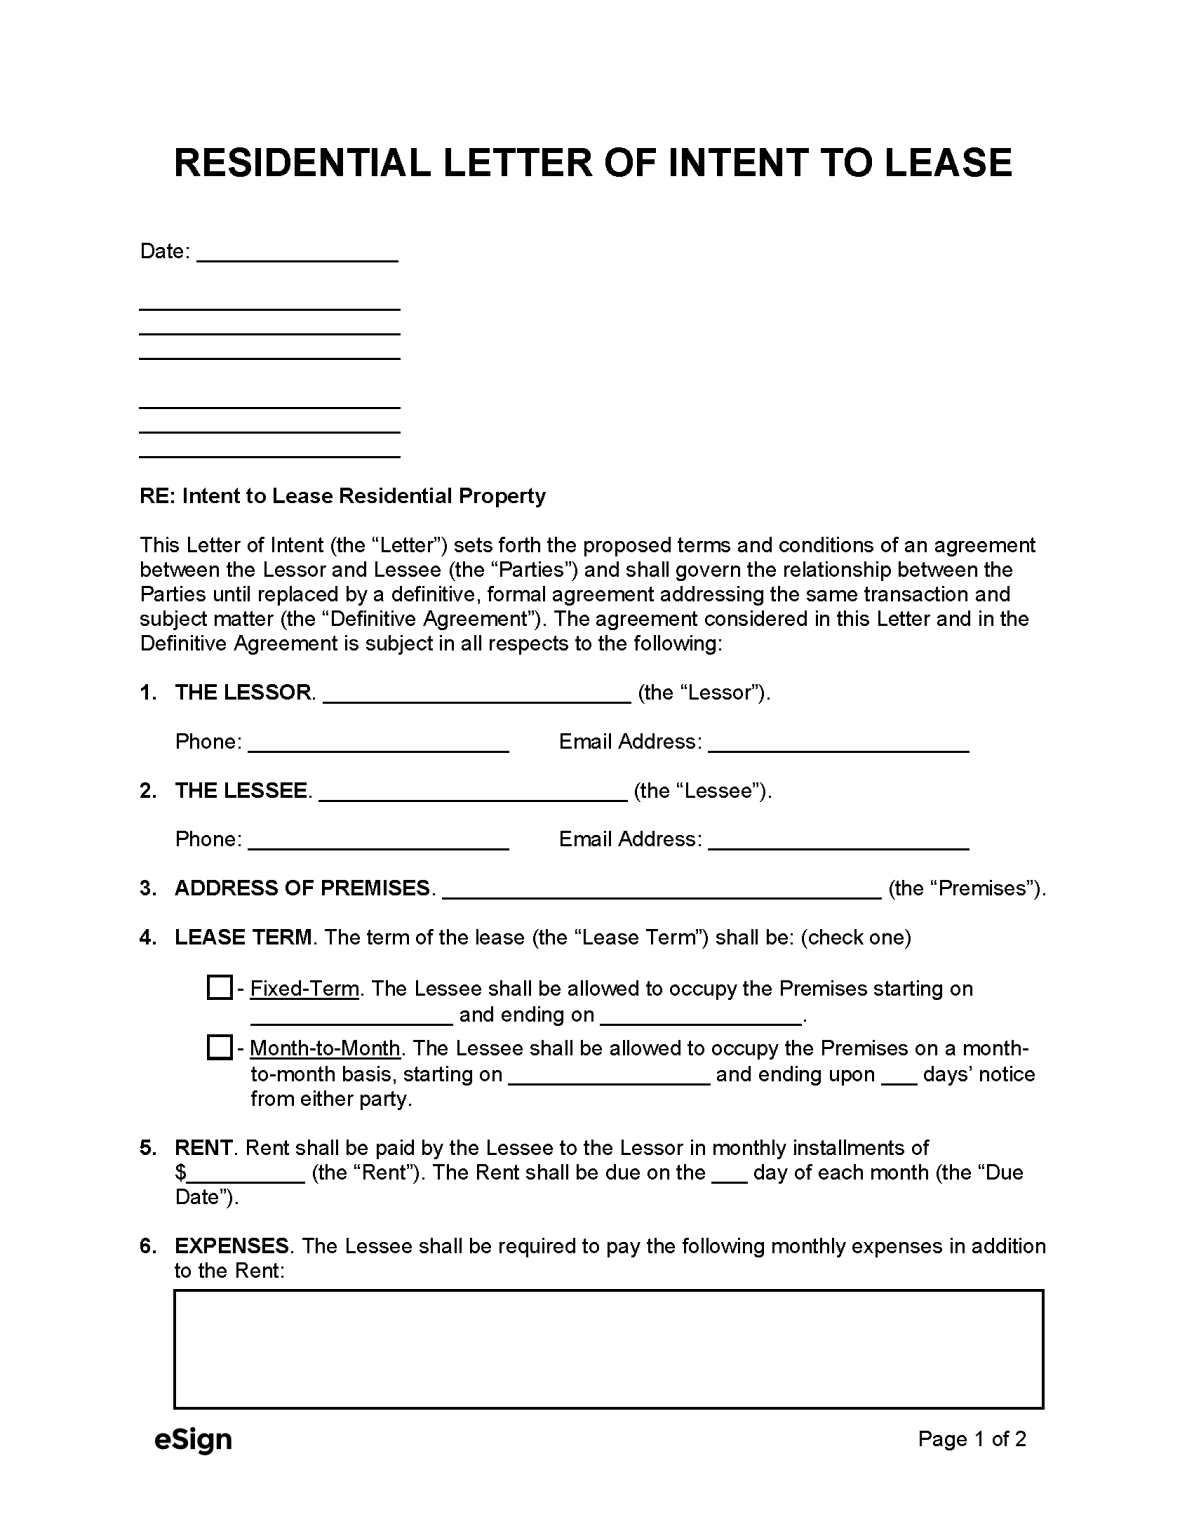 Residential Letter Of Intent To Lease Template 1187x1536 